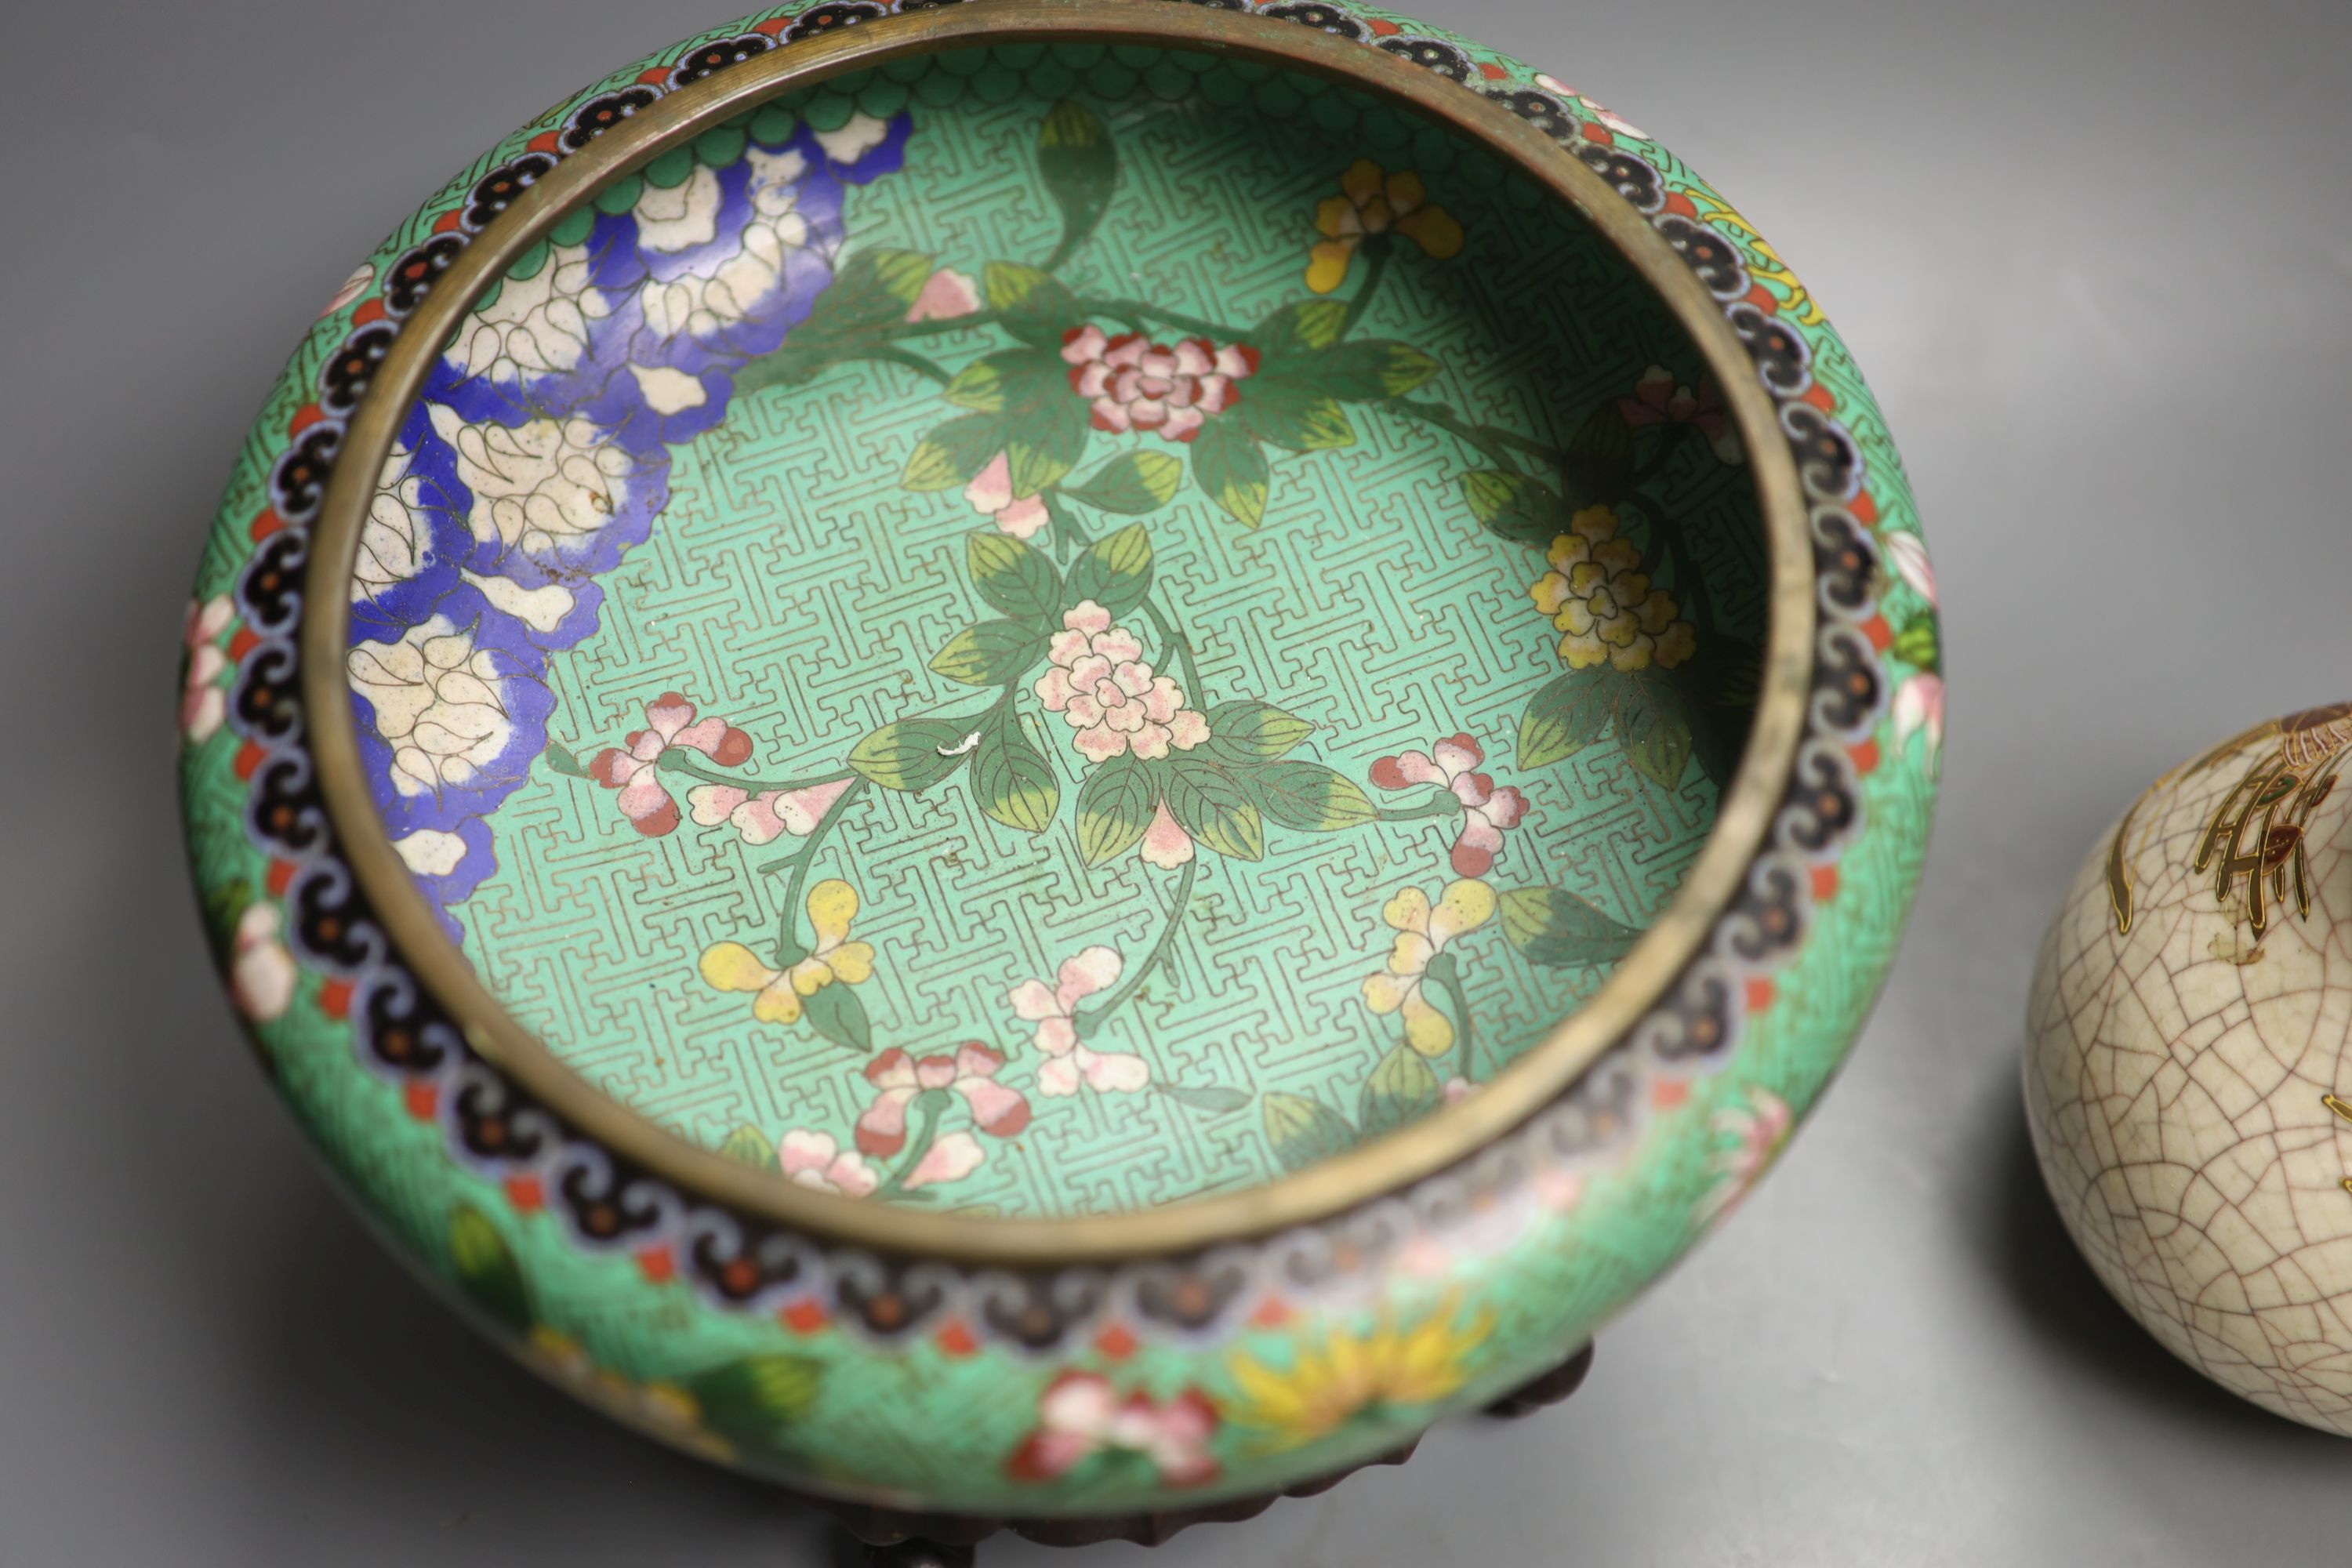 A Chinese cloisonne enamel bowl, wood stand, early 20th century and a Japanese vase